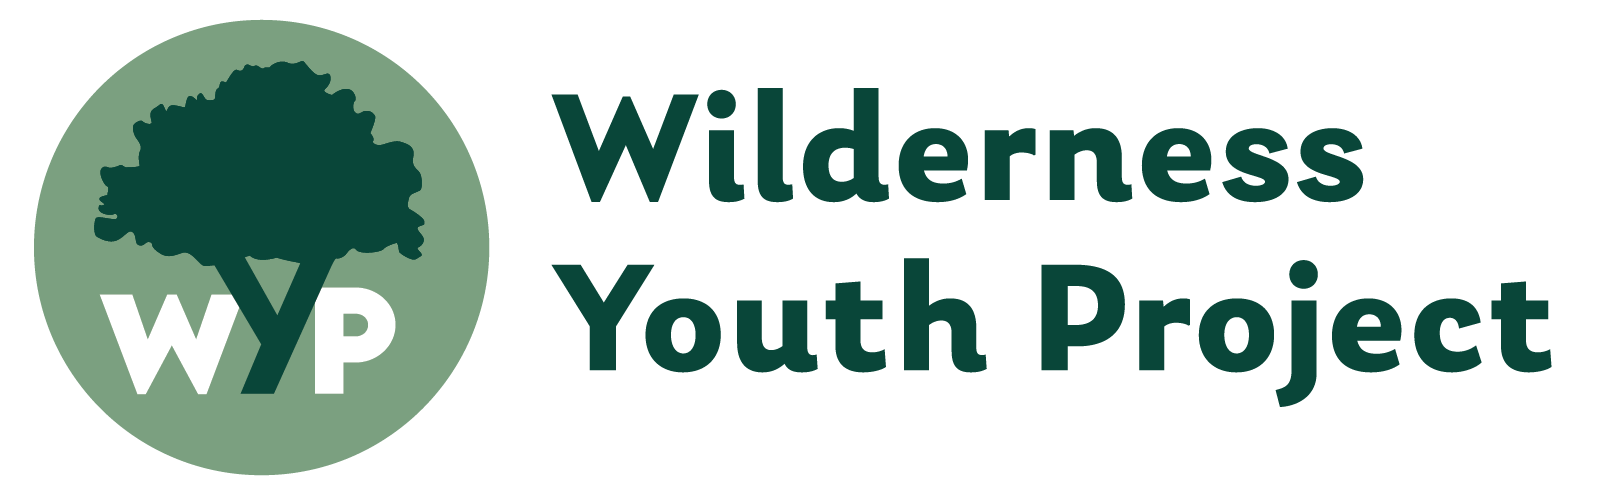 Wilderness Youth Project-logo